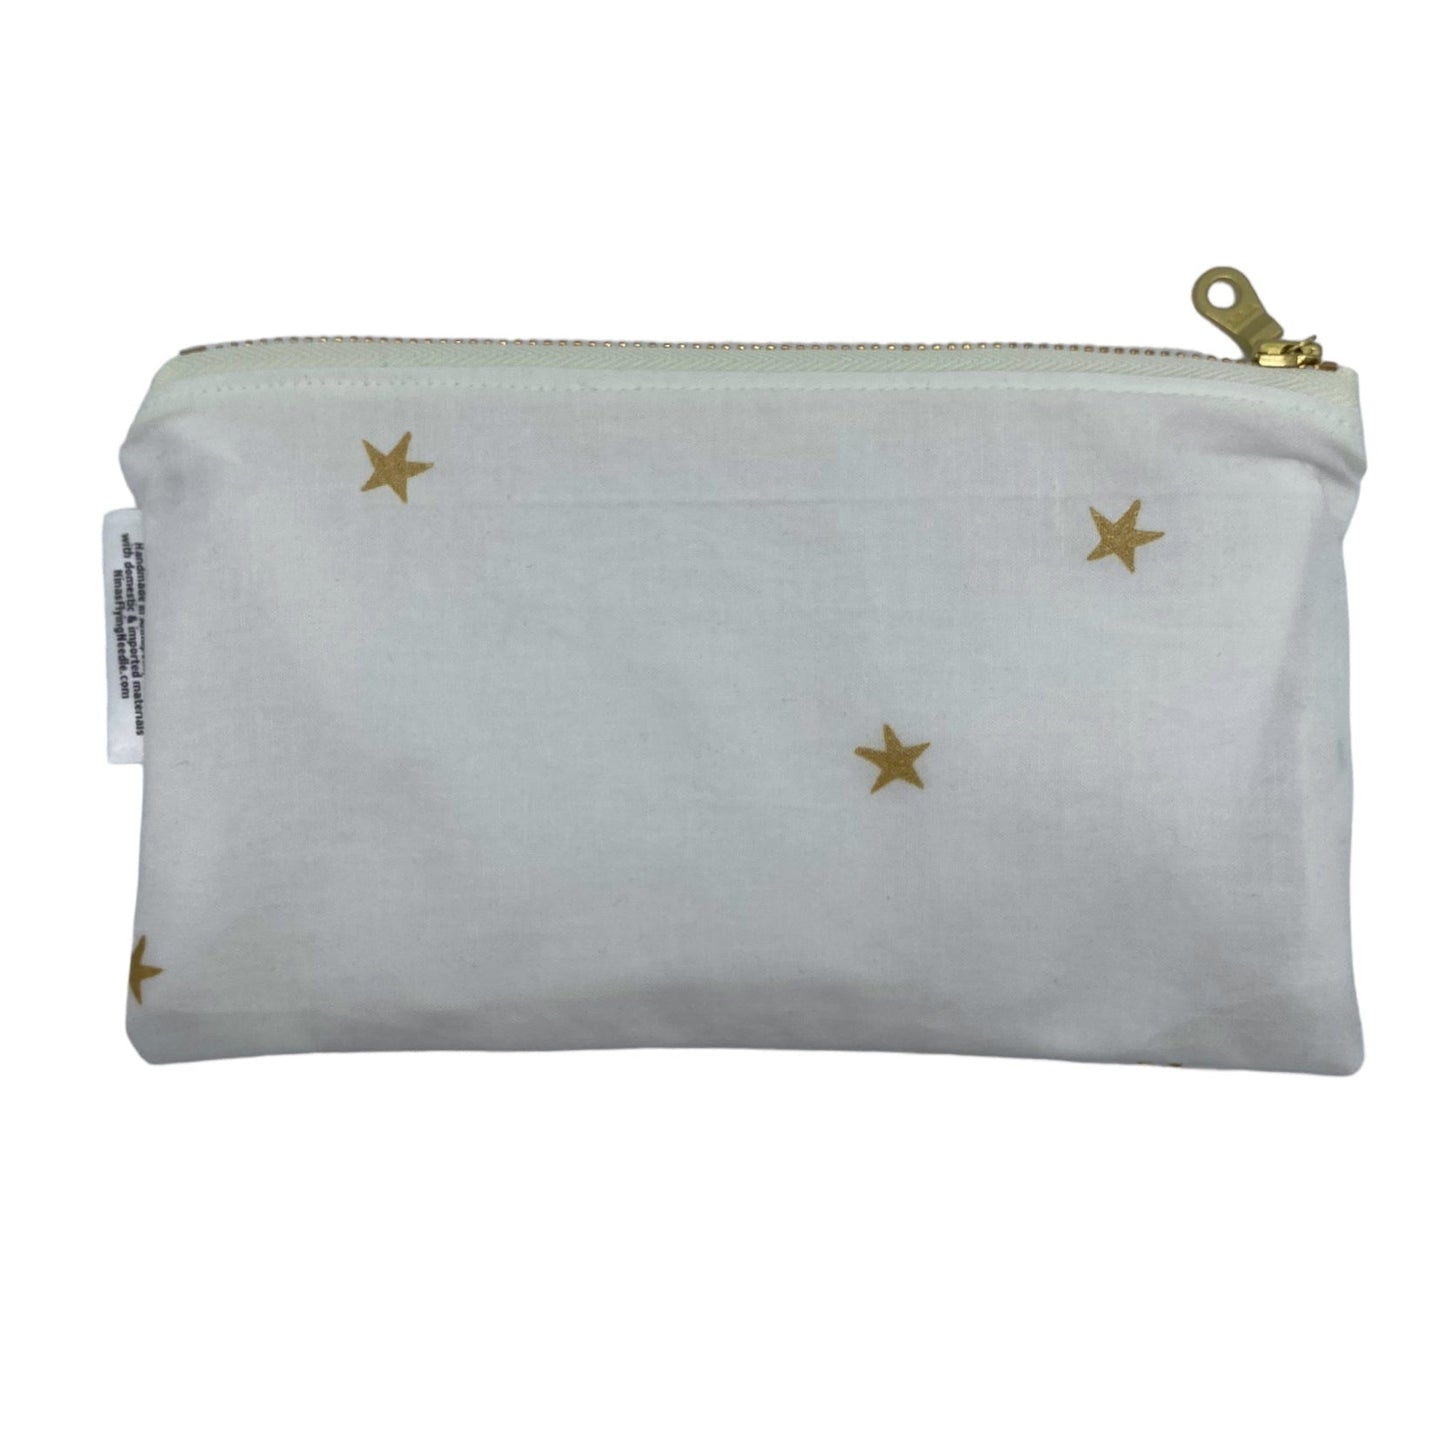 Knick Knack Sized Reusable Zippered Bag Stars Sparkly Gold Combo Print and Gold Metal Zipper